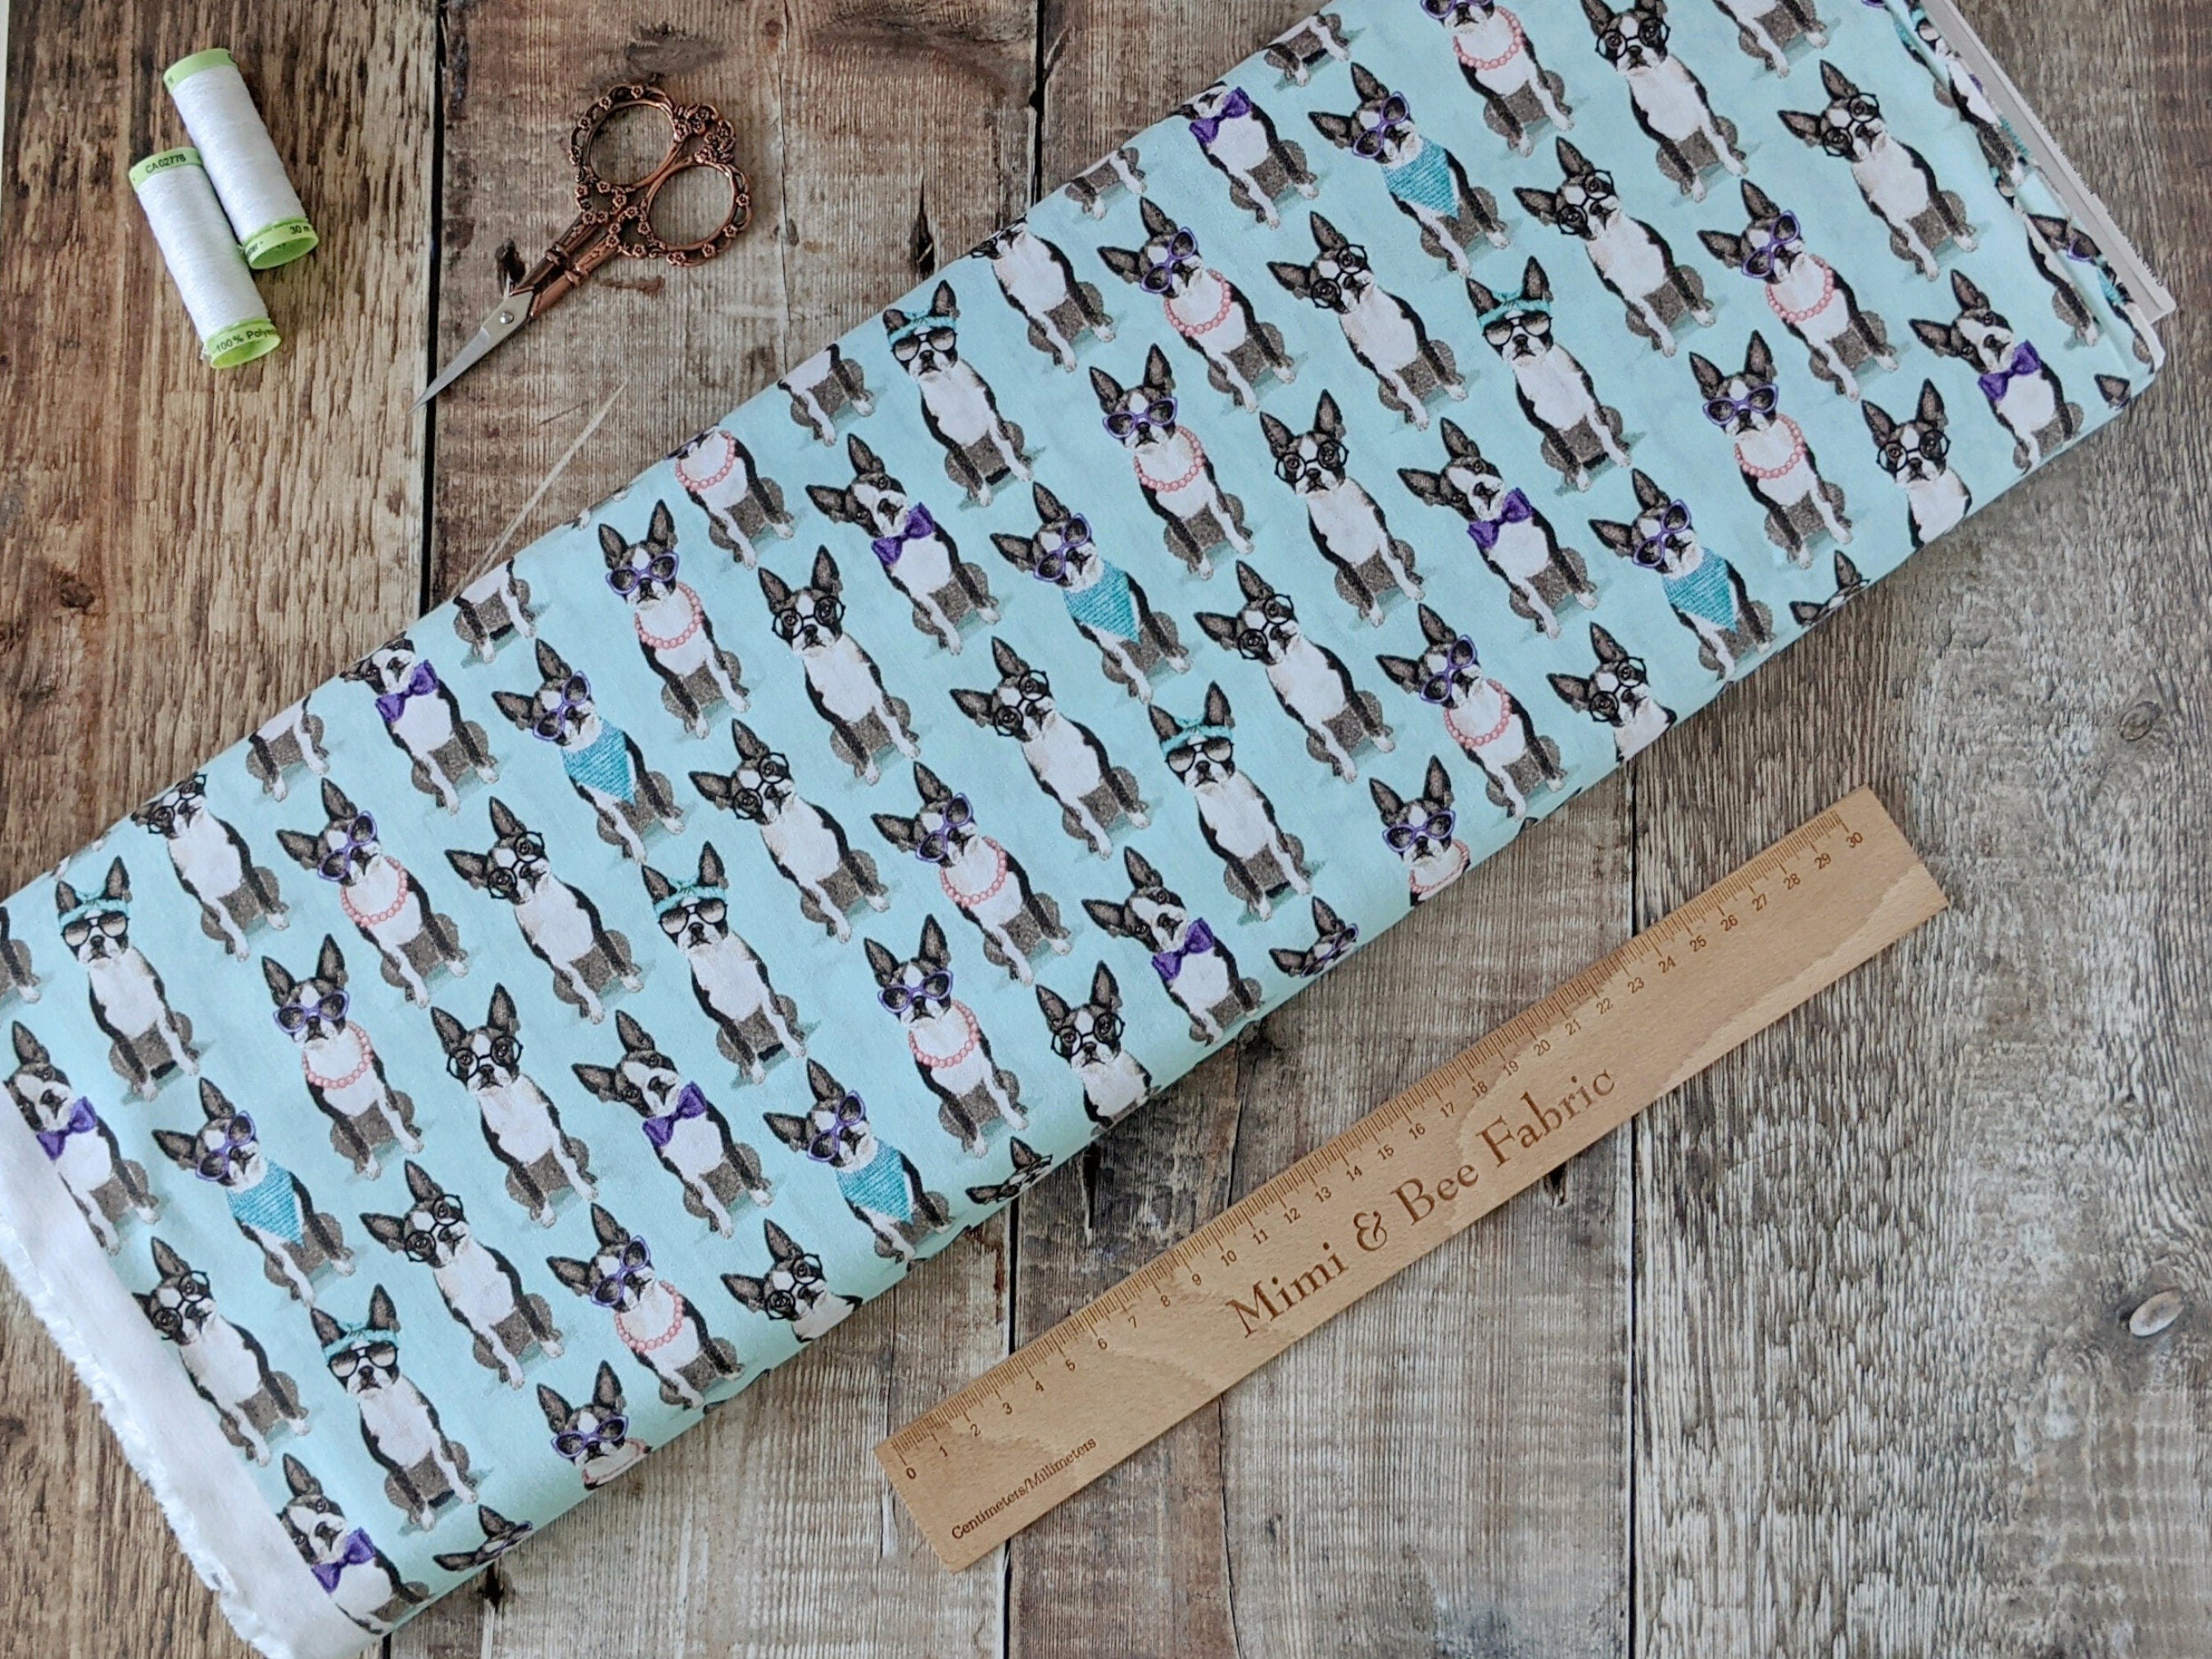 French Bulldog 100% cotton fabric - A Dog's Life collection by 3 Wishes